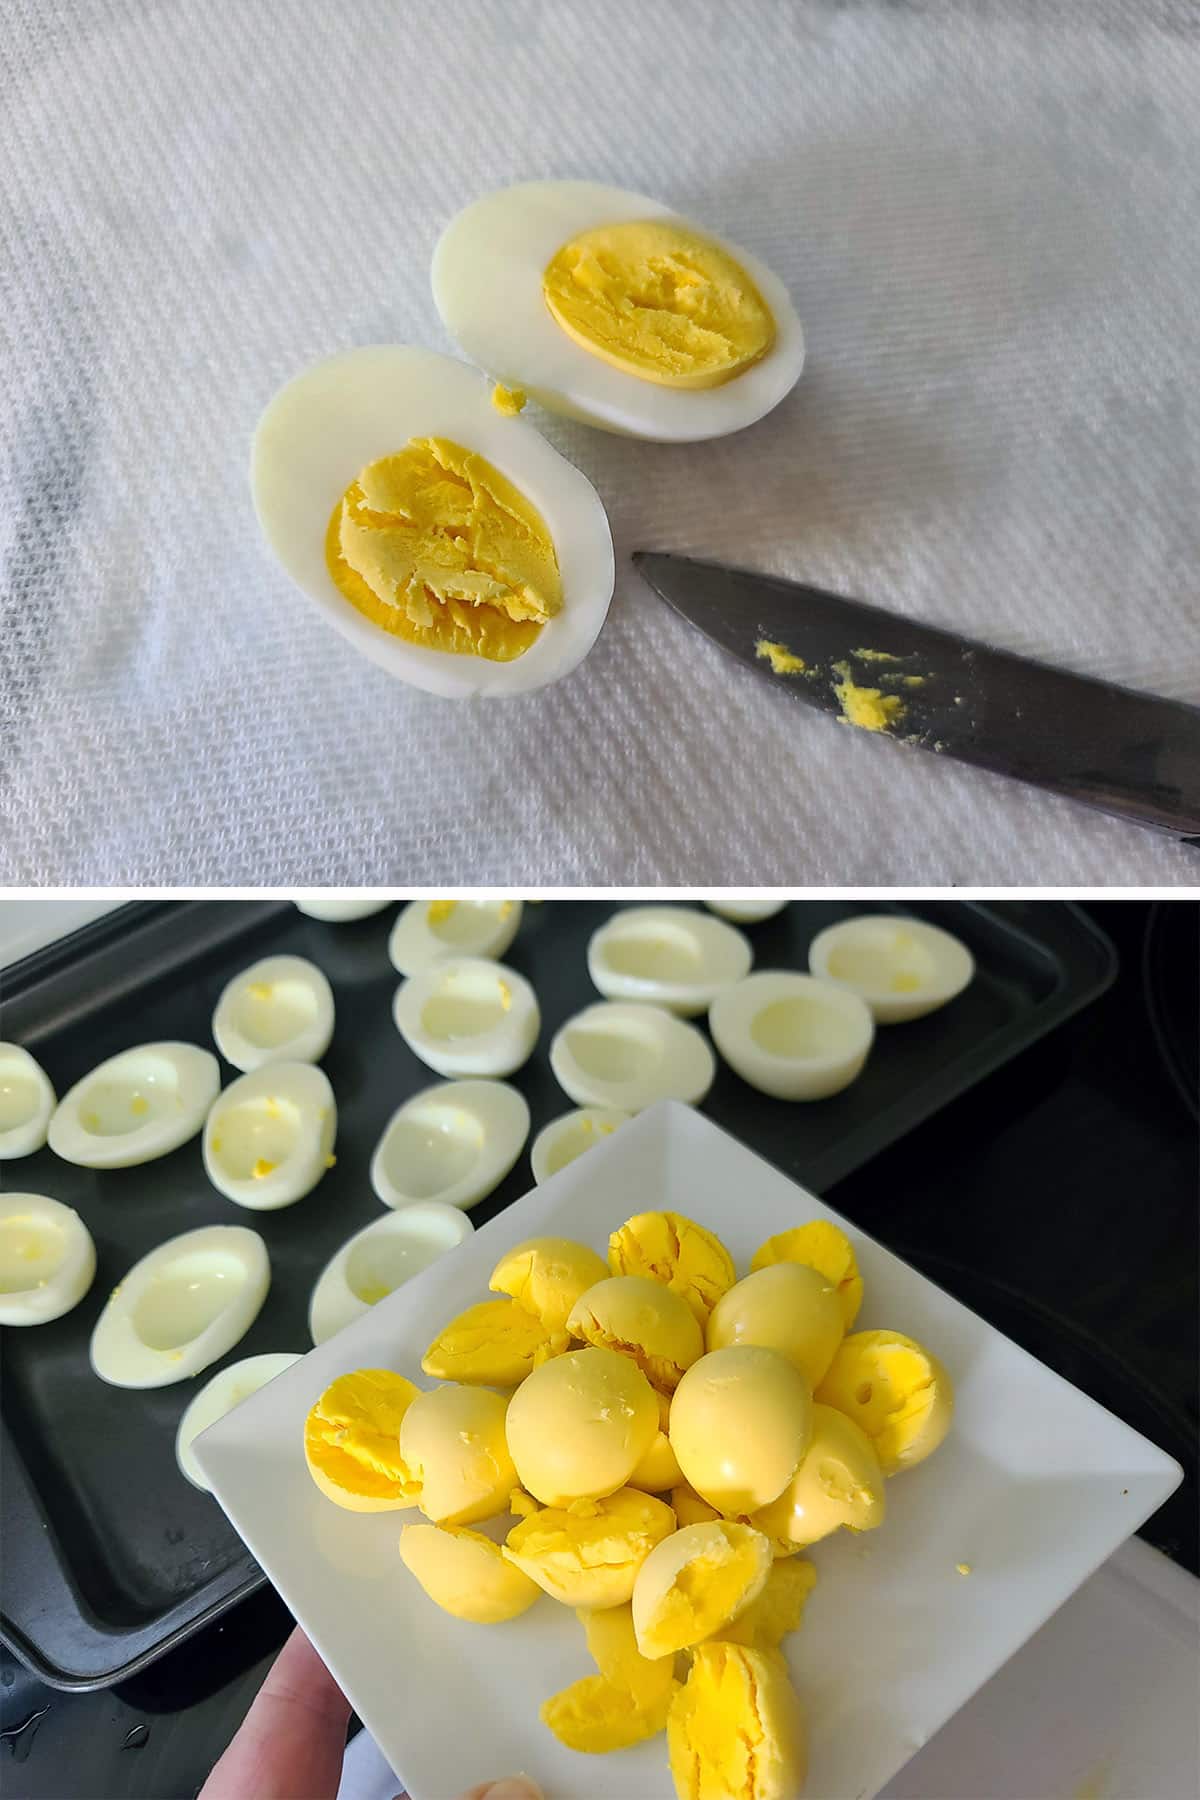 A 2 part image showing eggs being cut in half and the yolks removed.